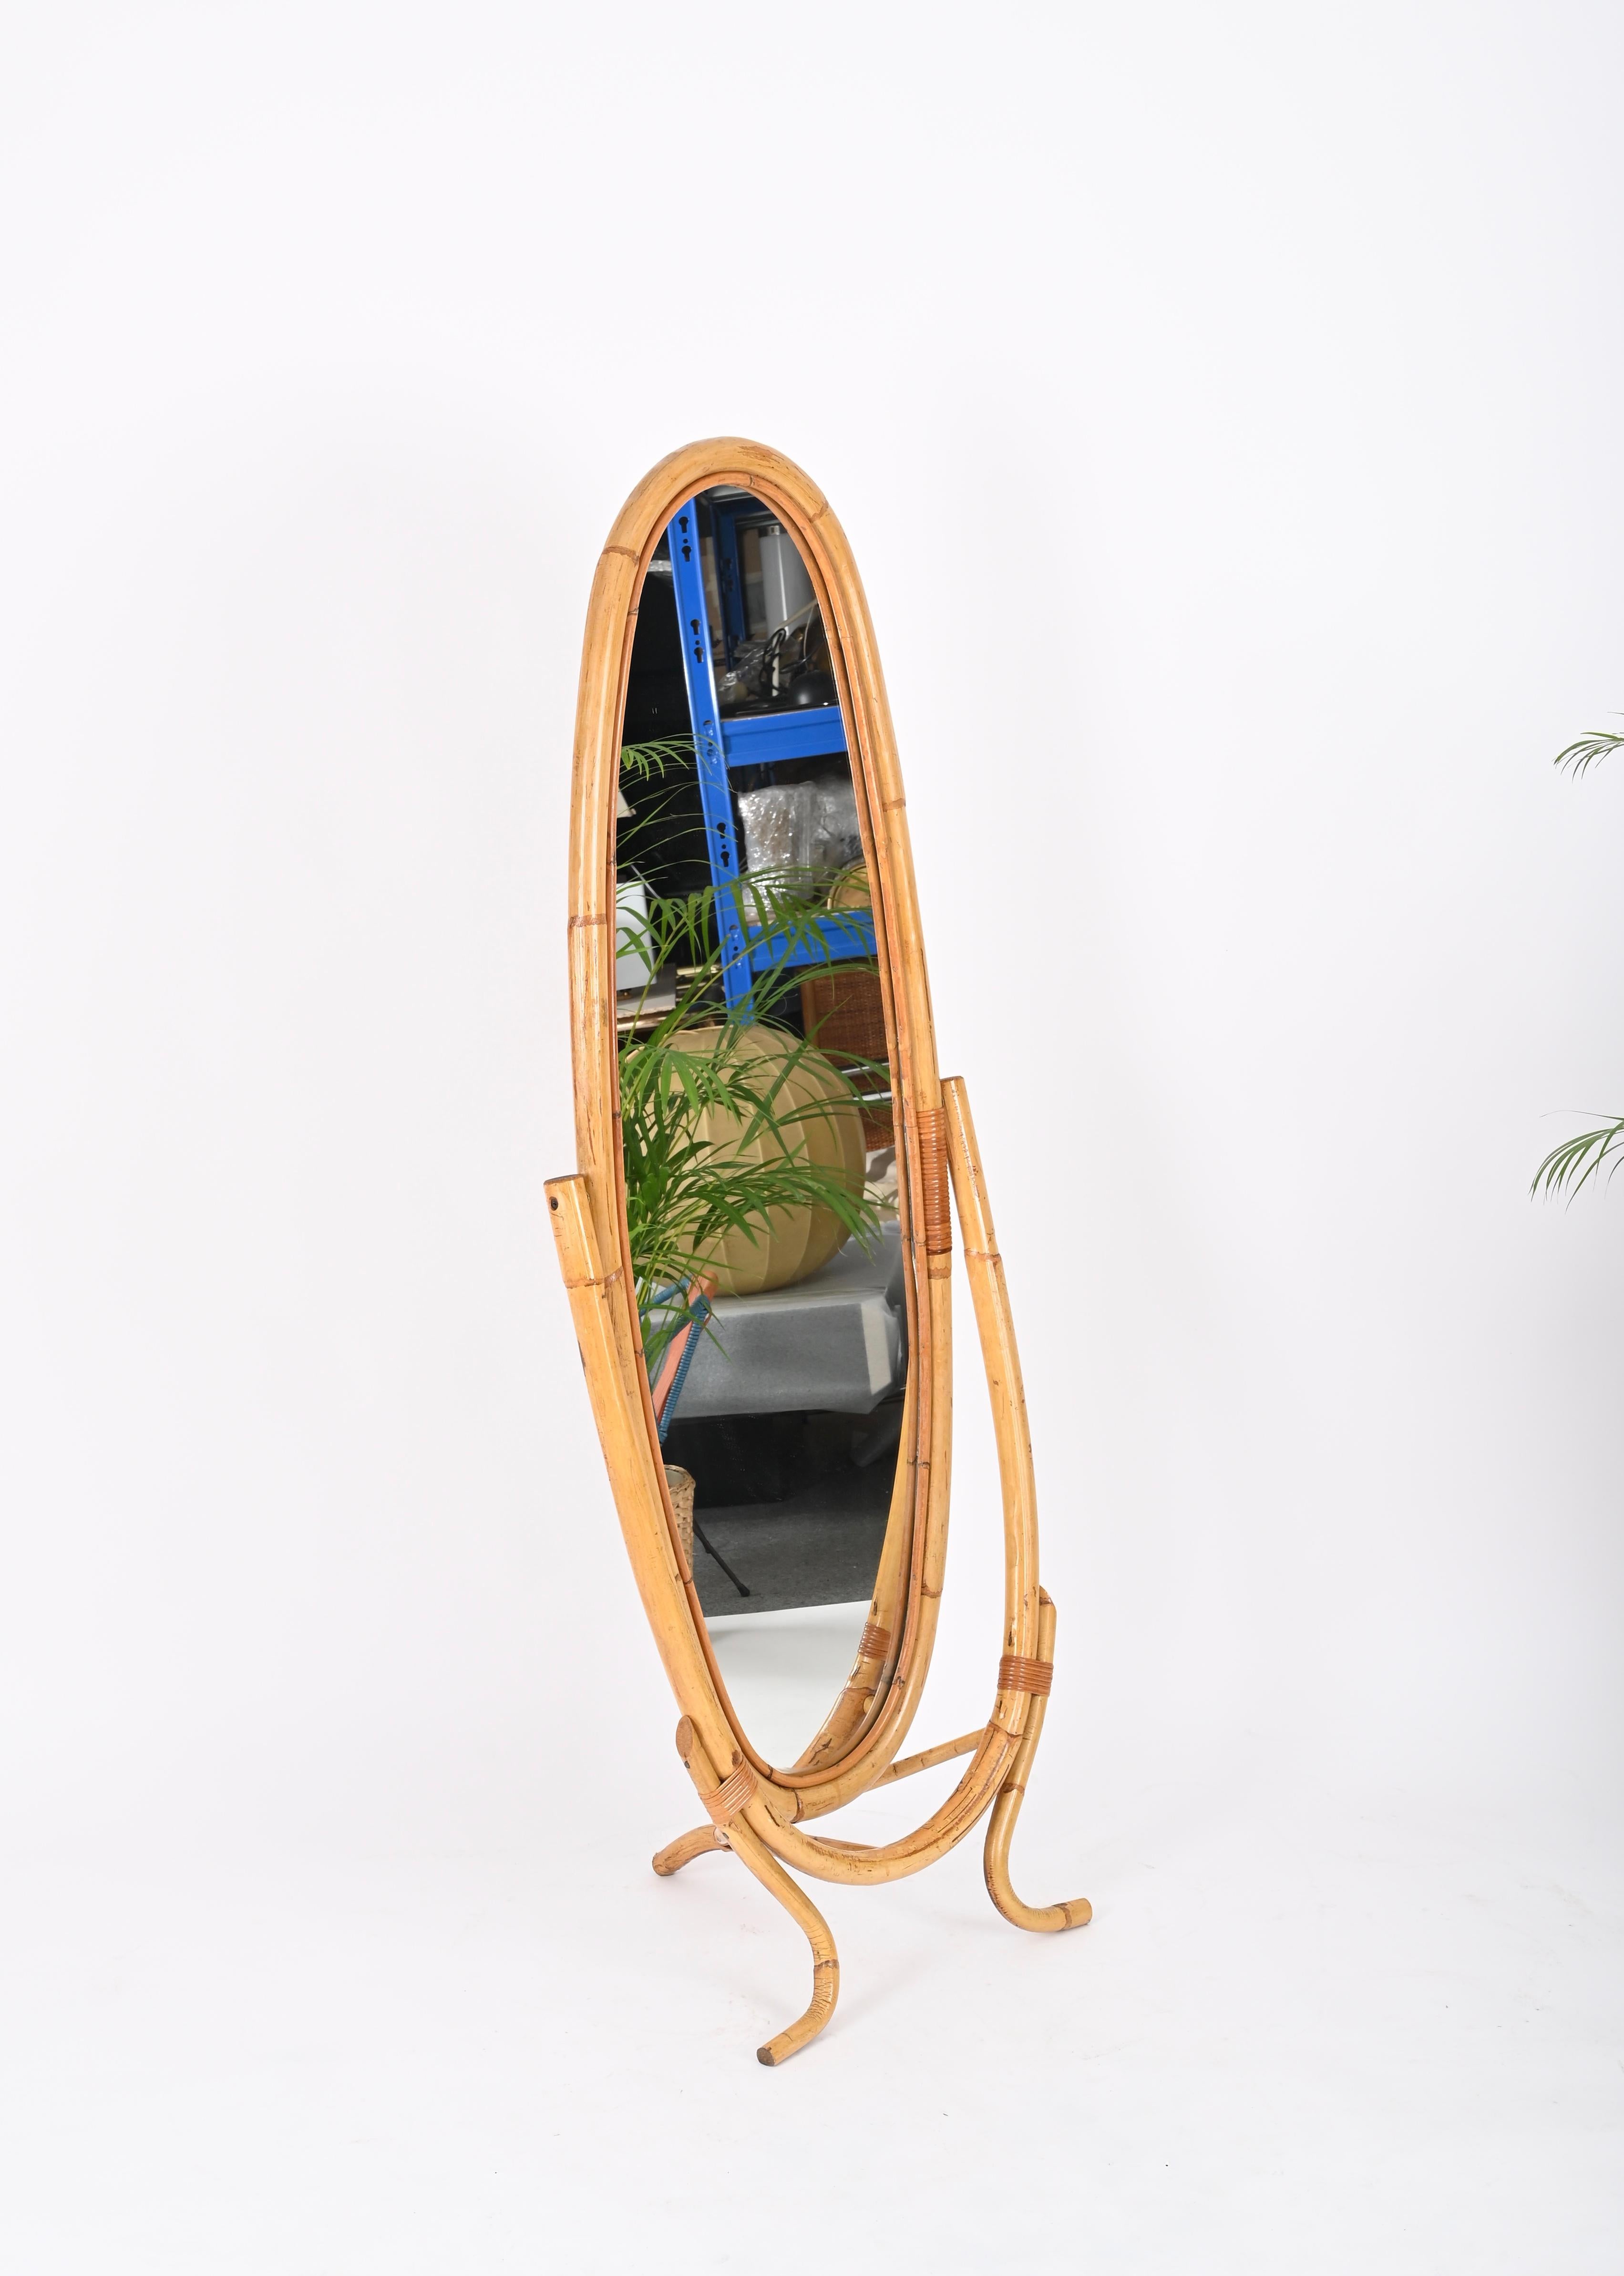 Fantastic mid-century French Riviera style floor mirror in curved bamboo, rattan and wicker. This unique mirror was produced in Italy during the 1960s.  

This gorgeous item has oblong shaped mirror mounted in a curved bamboo frame that is enriched